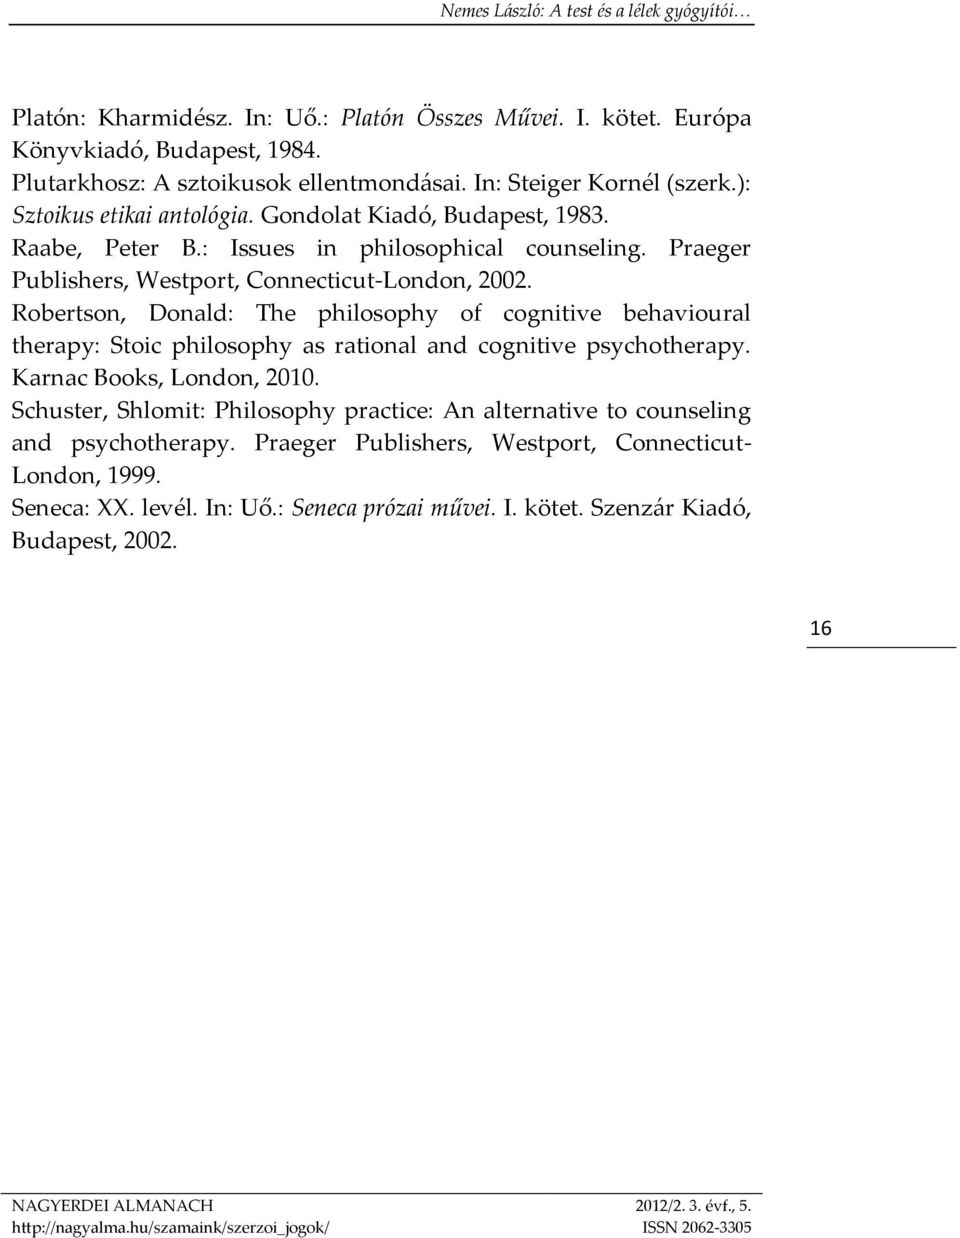 Robertson, Donald: The philosophy of cognitive behavioural therapy: Stoic philosophy as rational and cognitive psychotherapy. Karnac Books, London, 2010.